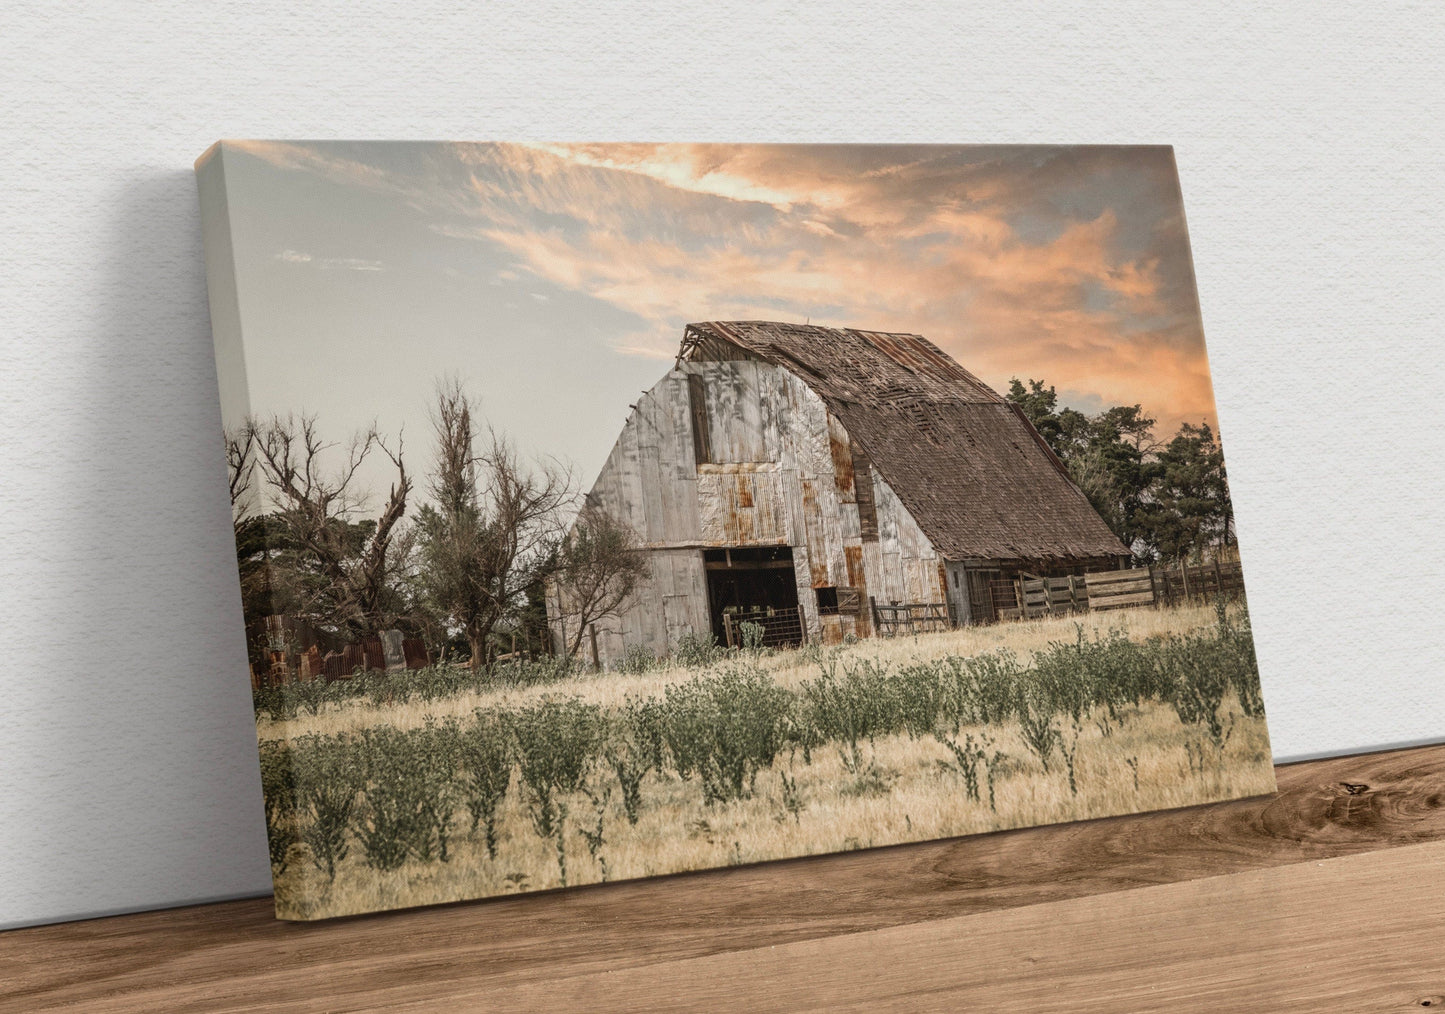 Rustic Old Barn Canvas Print Canvas-Unframed / 12 x 18 Inches Wall Art Teri James Photography